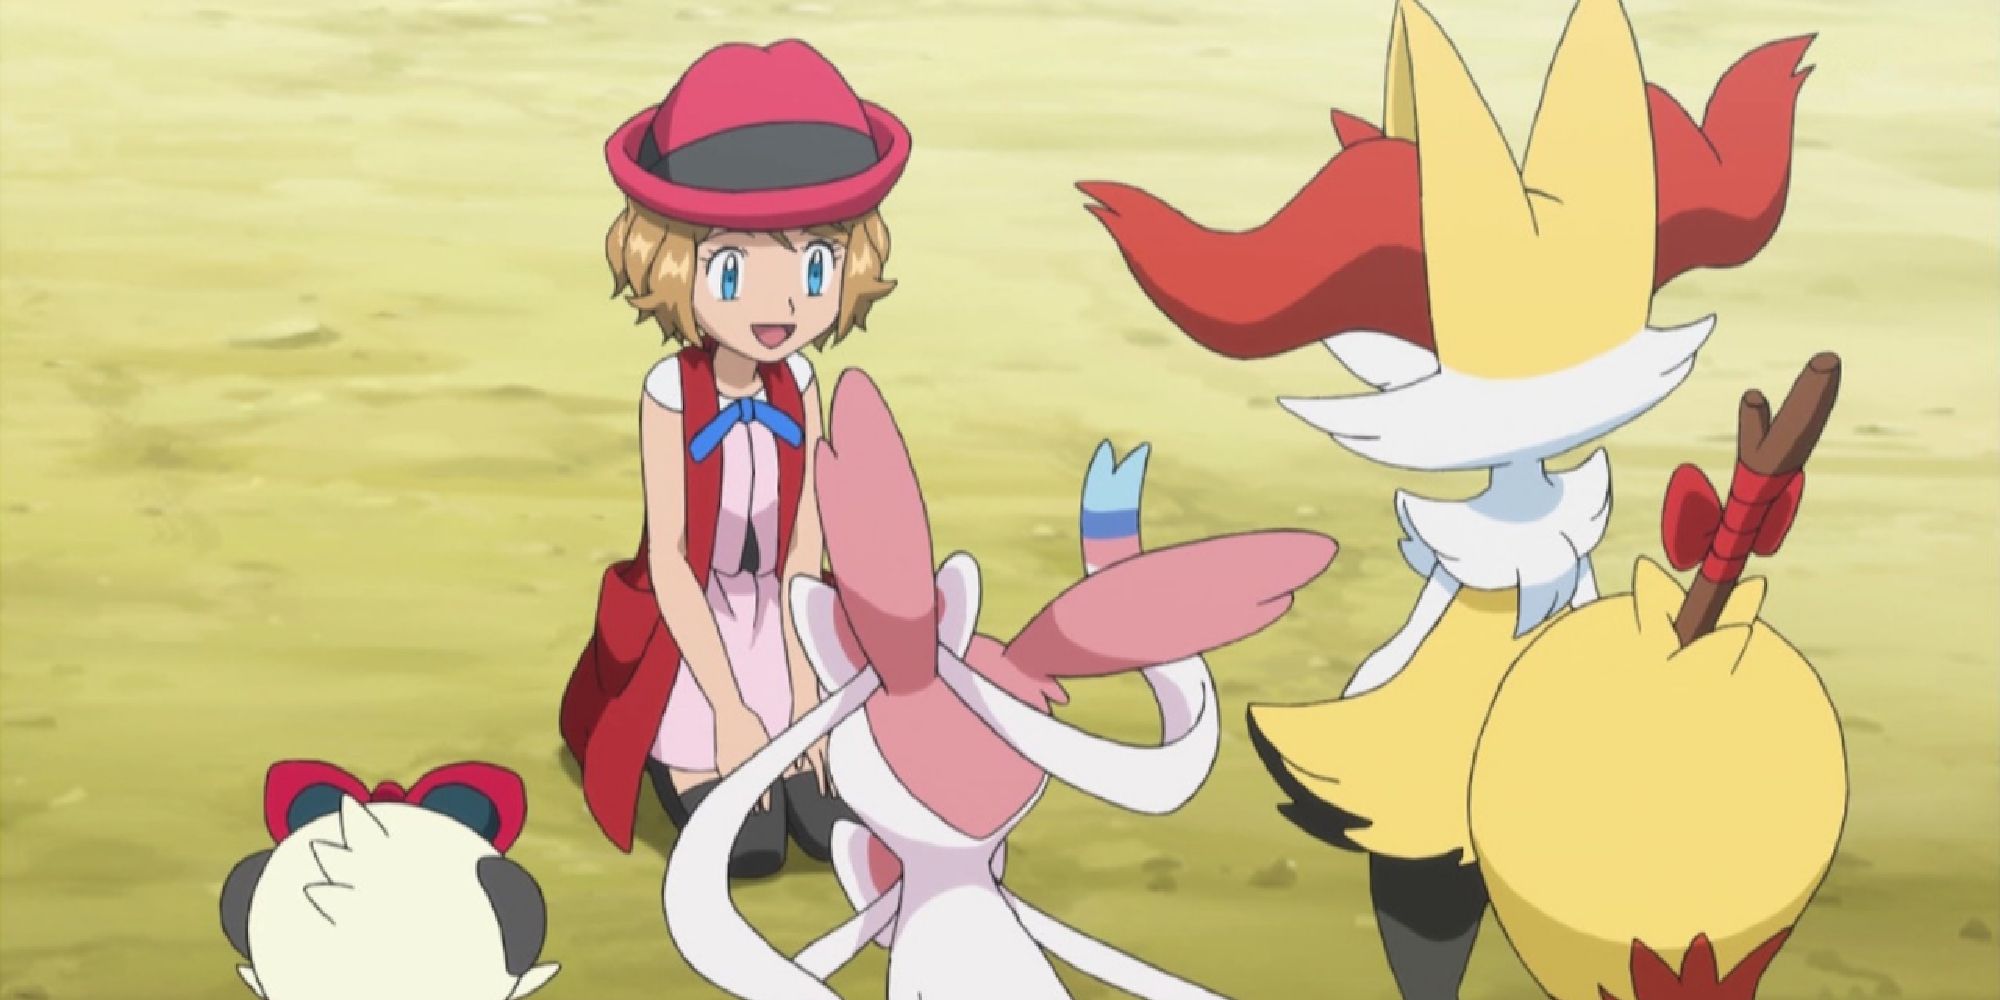 Serena talking to Pancham, Braixen, and Sylveon on a Pokemon field